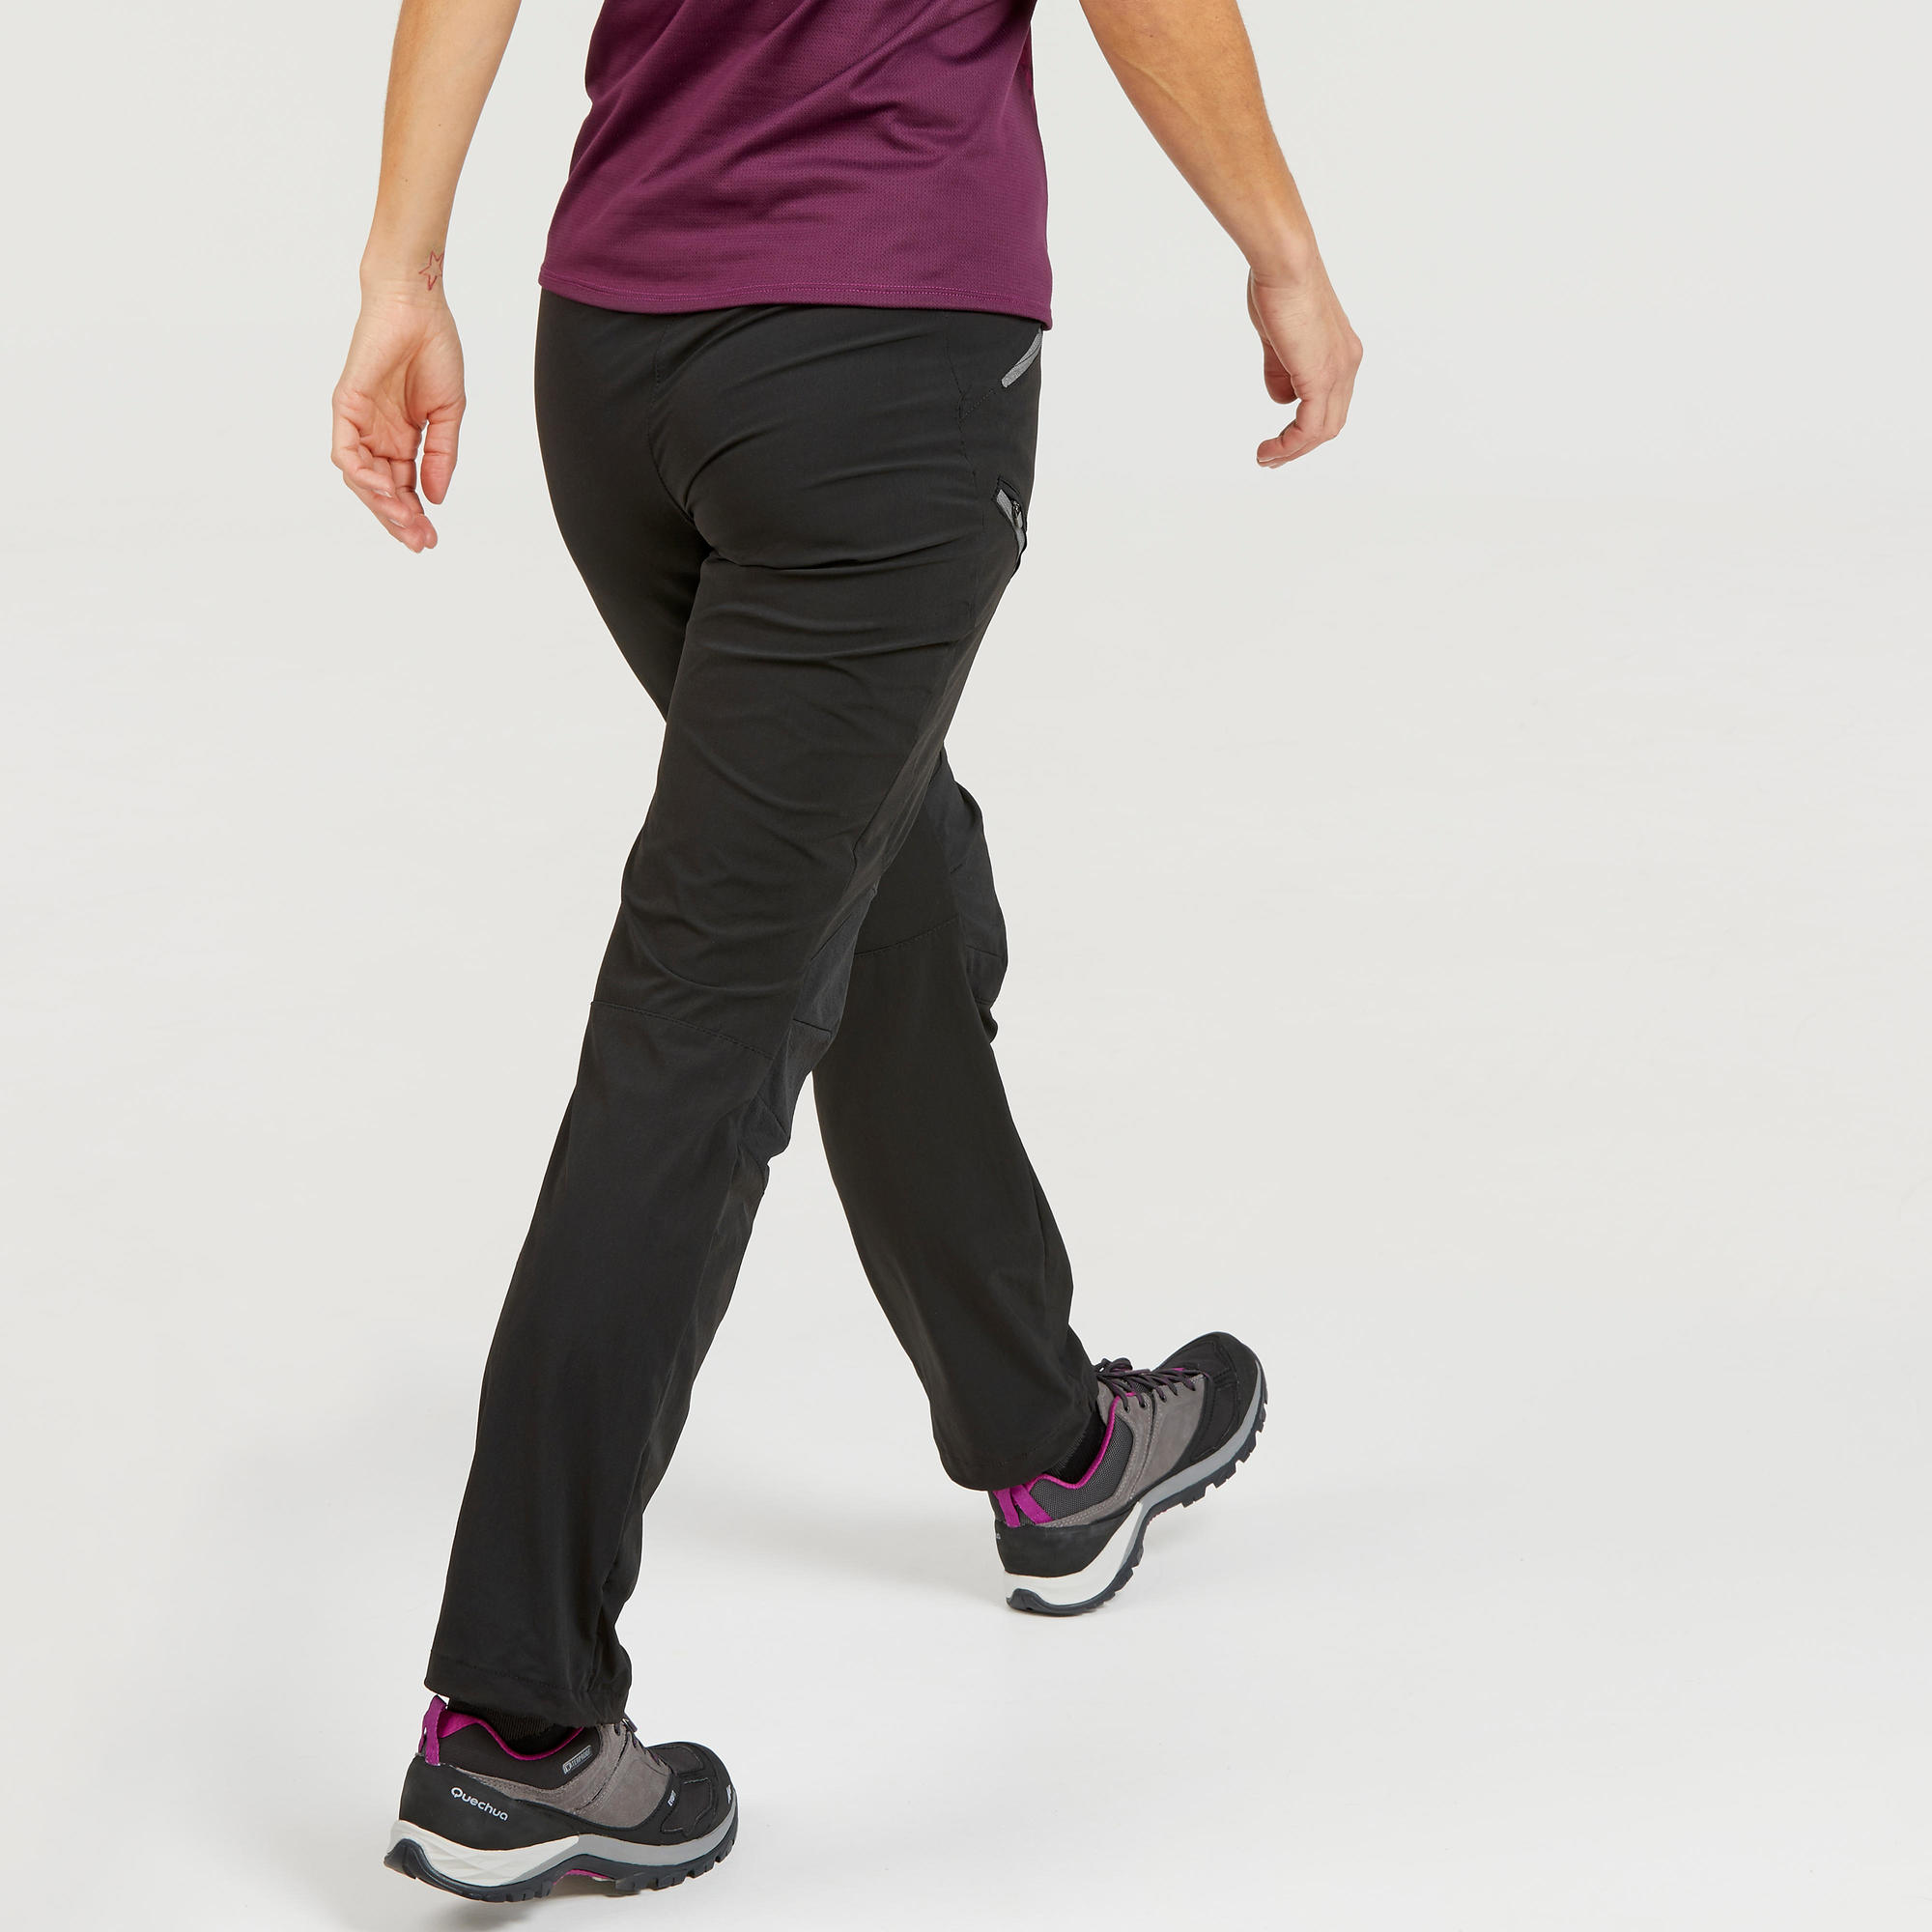 MH500, Hiking Pants, Women's - image 4 of 11